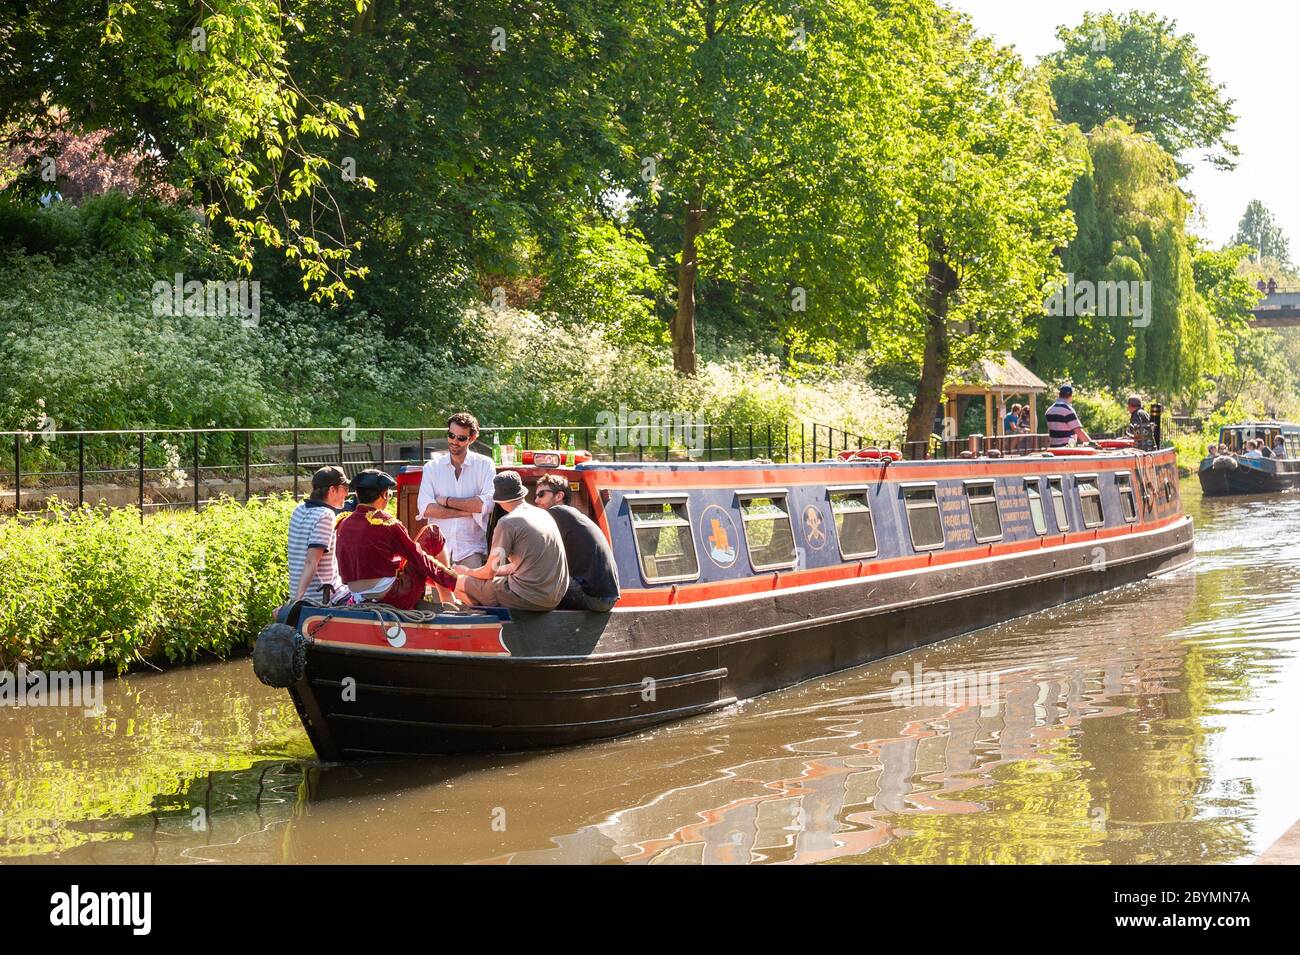 Narrowboat travelling down the Regent's Canal in London, UK Stock Photo